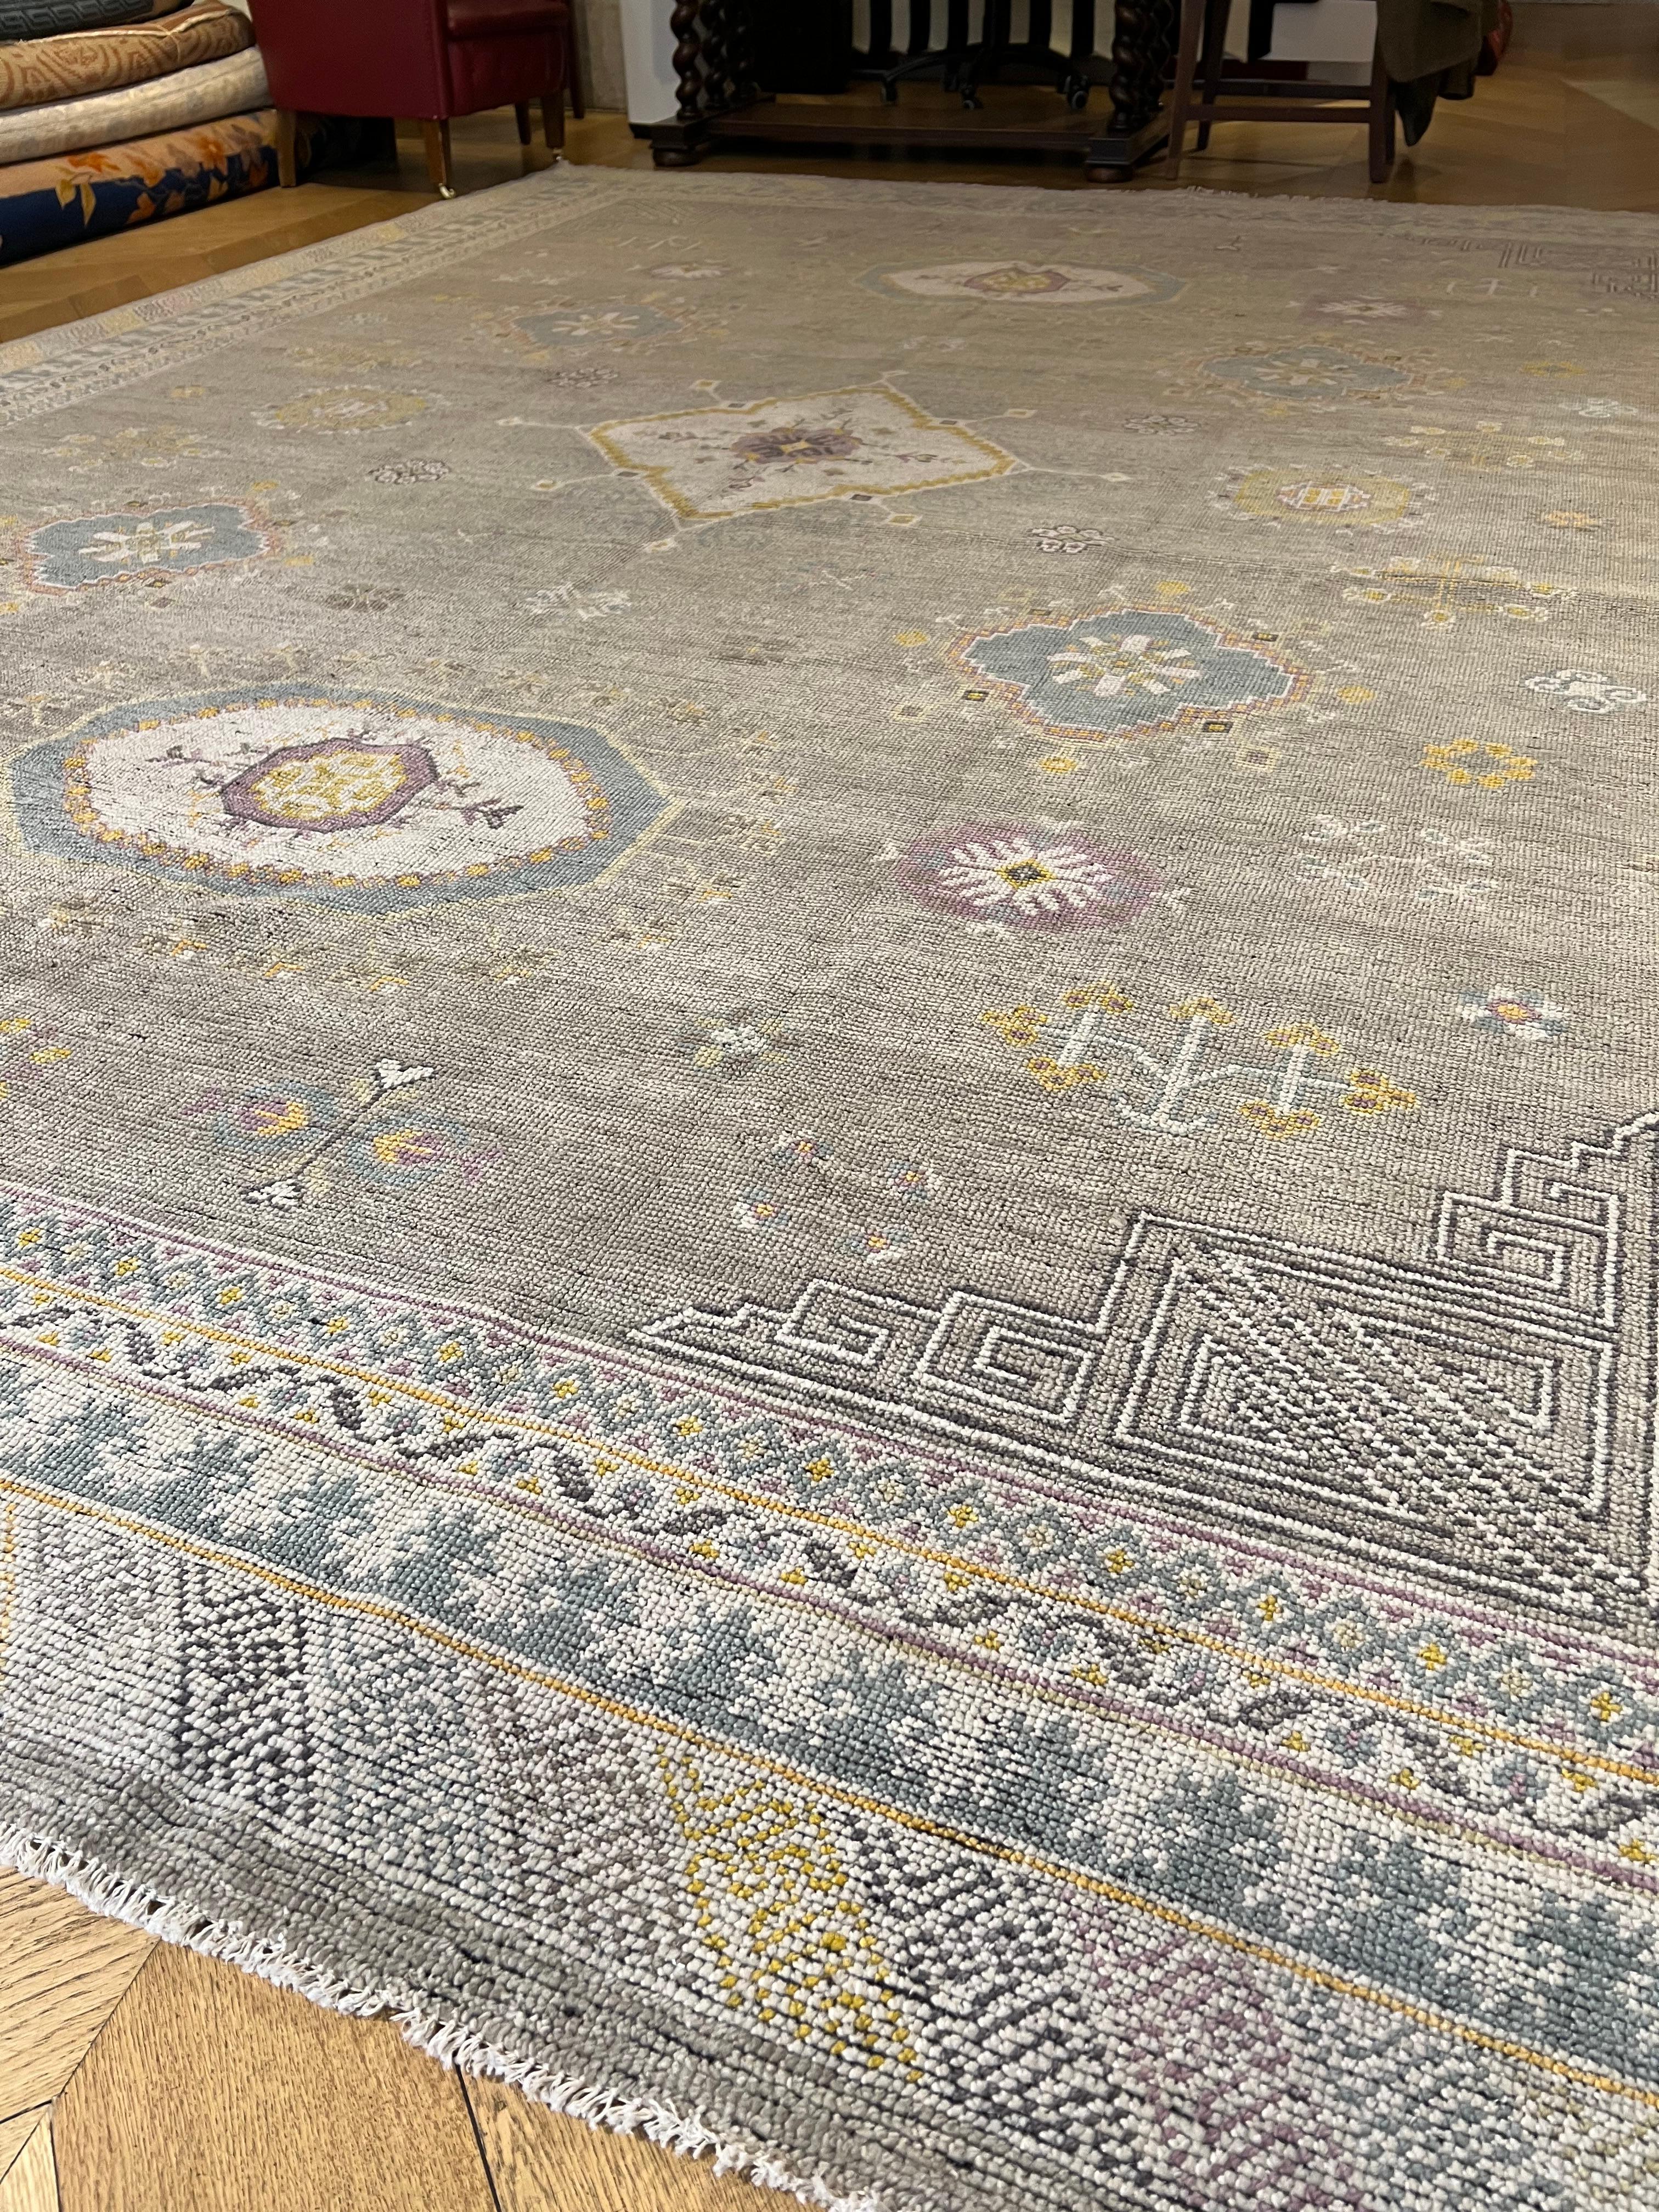 A beautiful carpet of Turkish manufacture. The decor is clearly inspired by the fabulous carpets of the oasis of Khotan in the area of Samarkand. The hand-spun wool and soft colours give the carpet a sophisticated look, which makes it suitable for